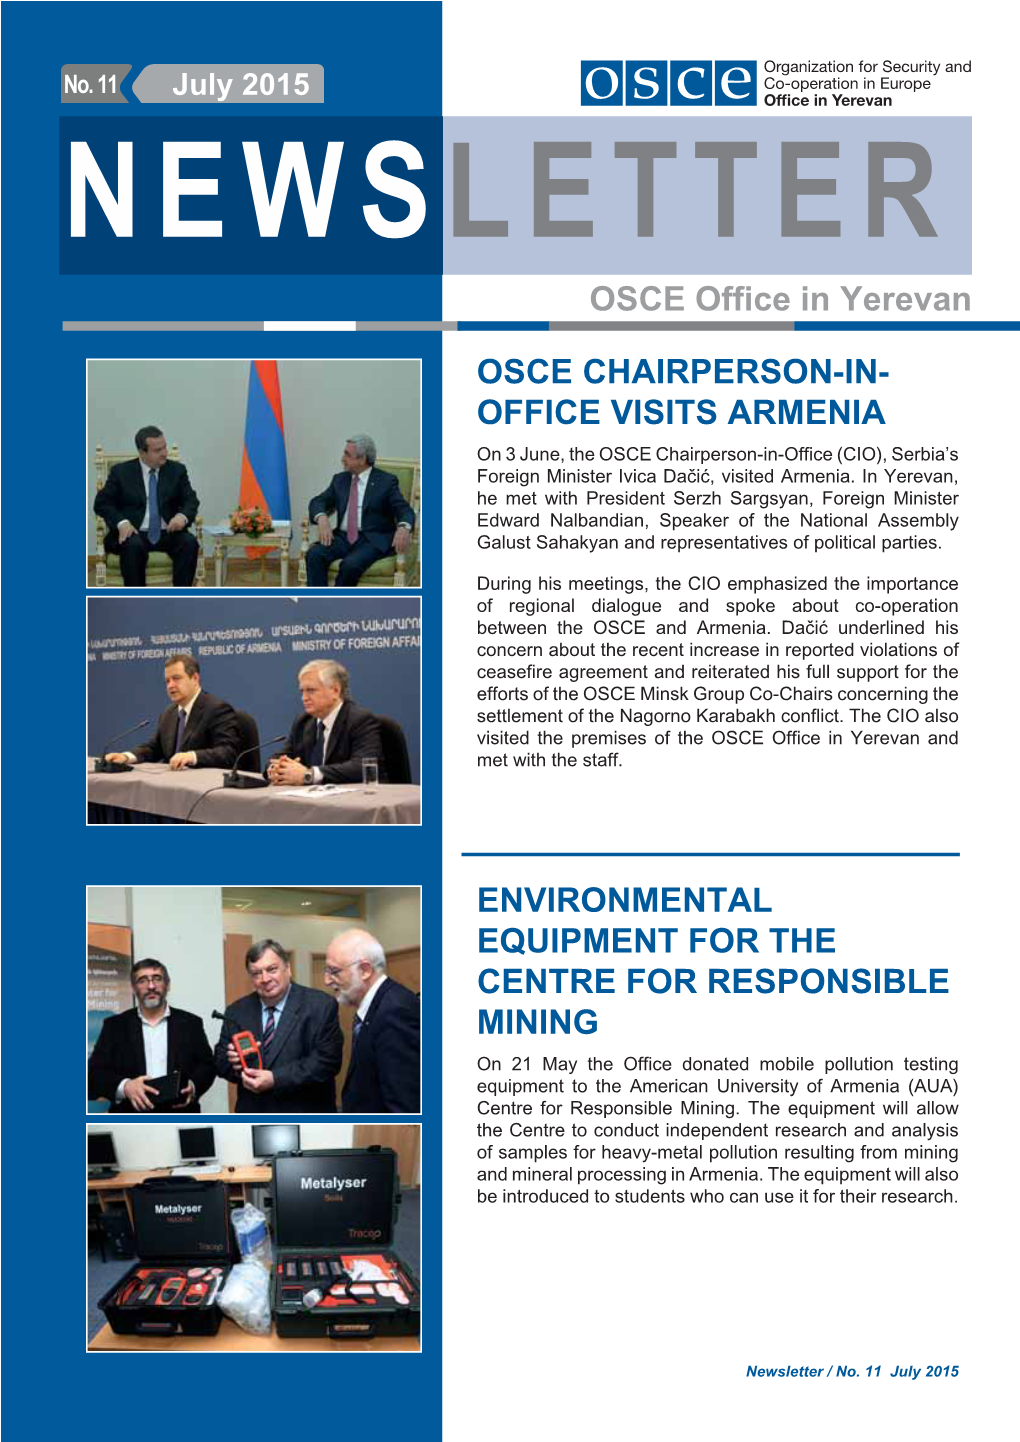 Osce Chairperson-In- Office Visits Armenia